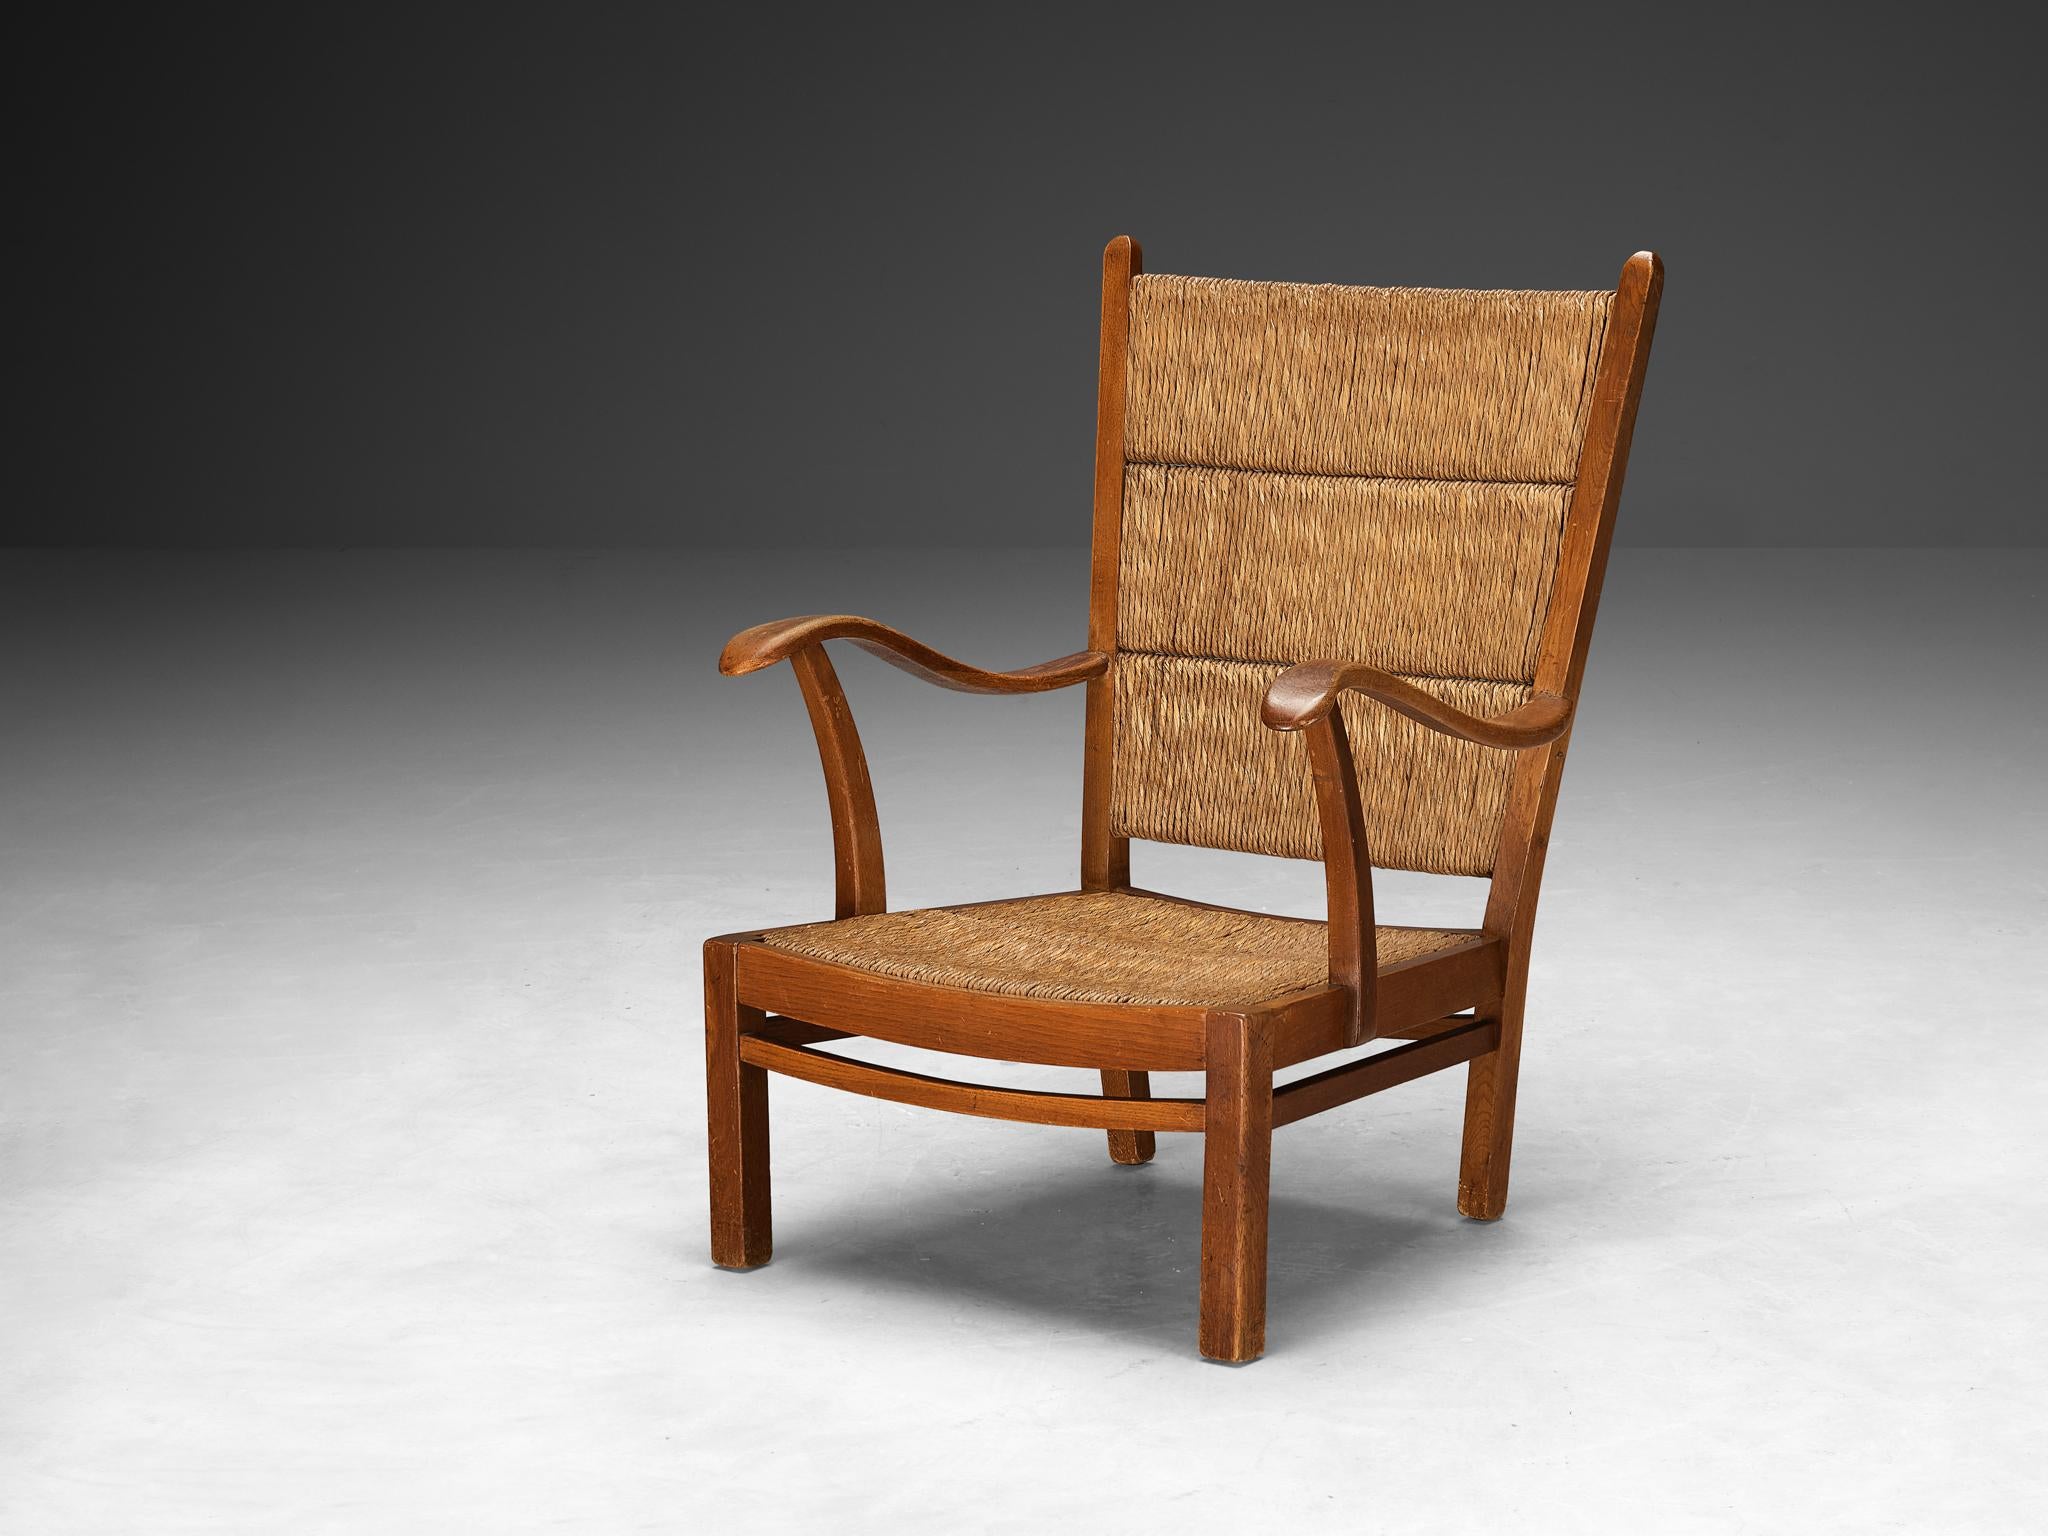 Rustic Dutch Lounge Chair in Woven Straw and Wood